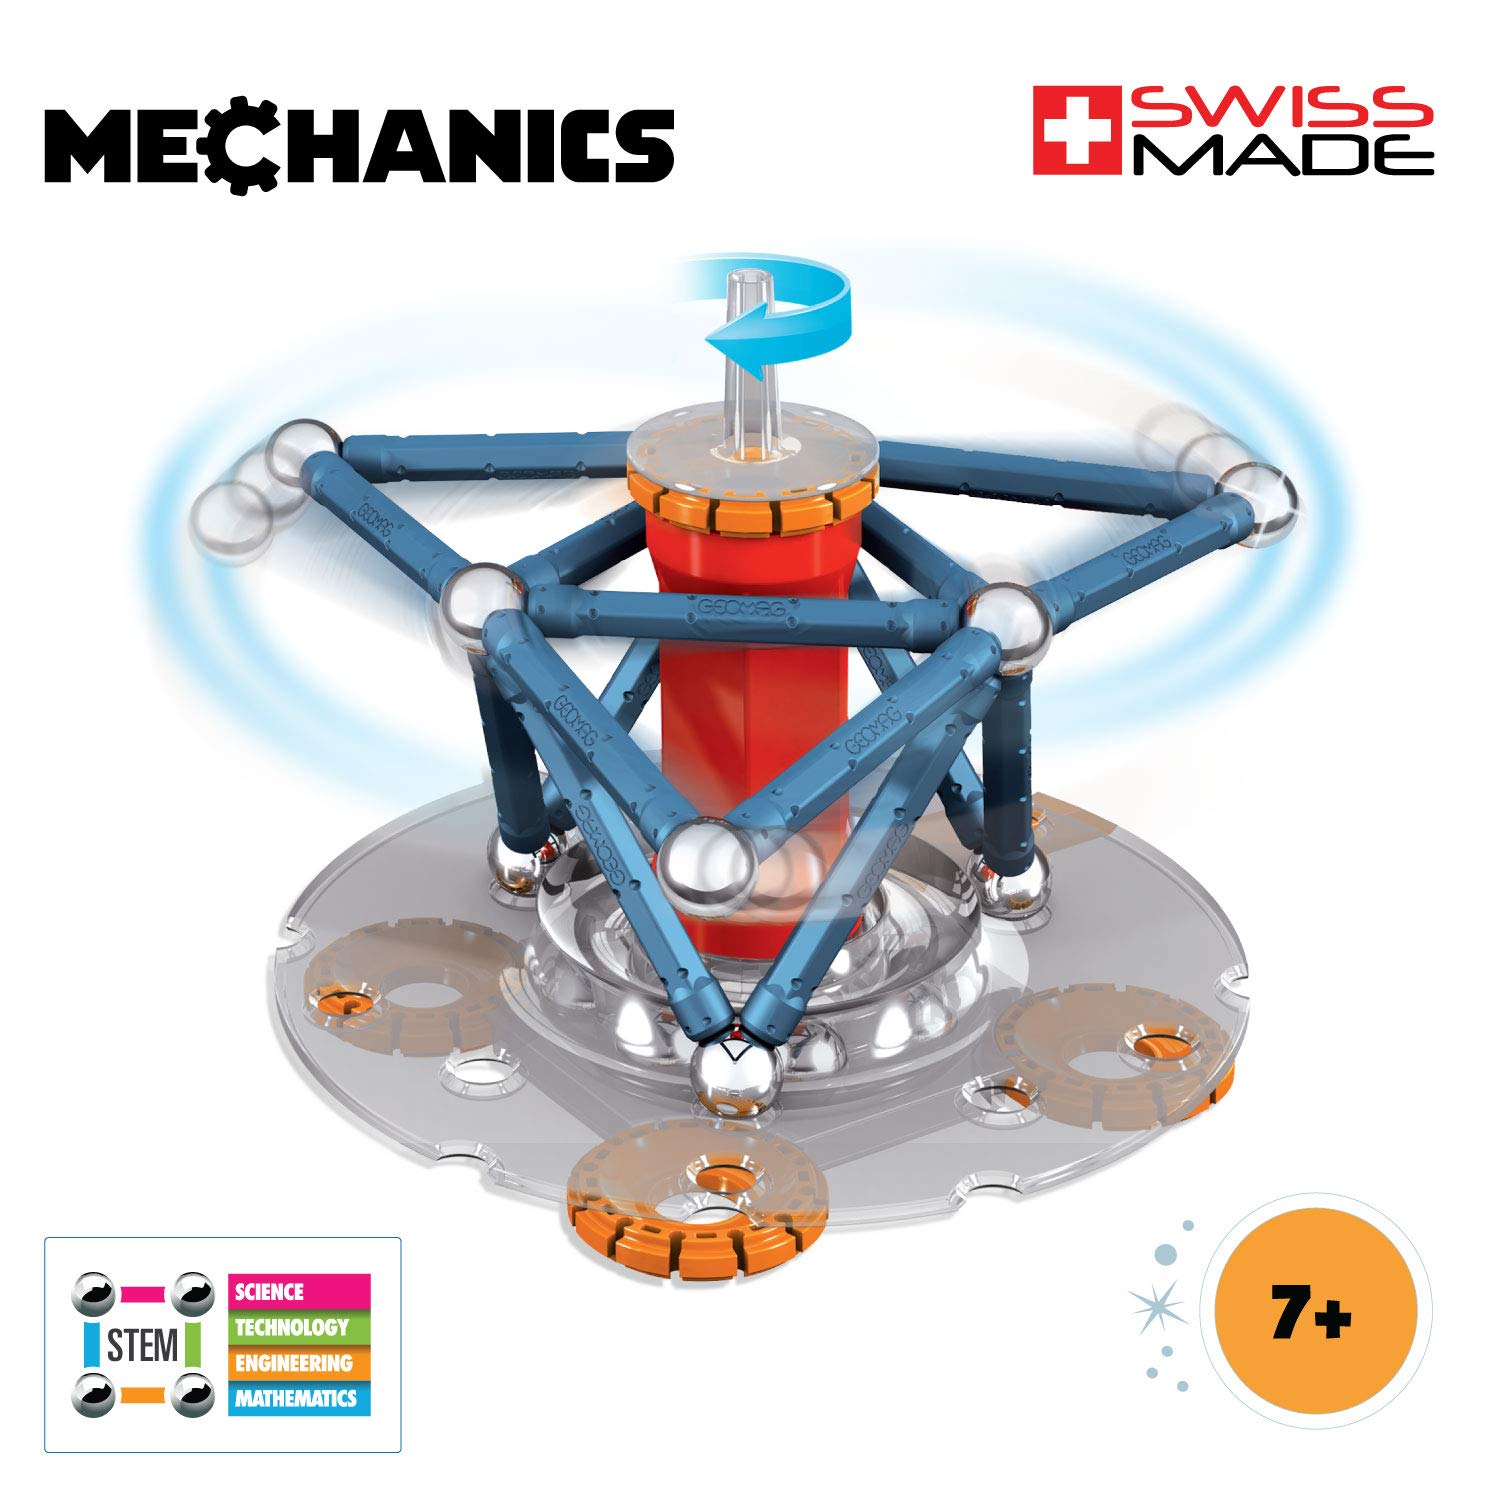 Geomag Magnetic Toys | Kids STEM Building Toys | Mechanics Magnetic Motion | Magnet Gears Construction | Educational Gifts | Swiss-Made | Age 7+ 86 Piece